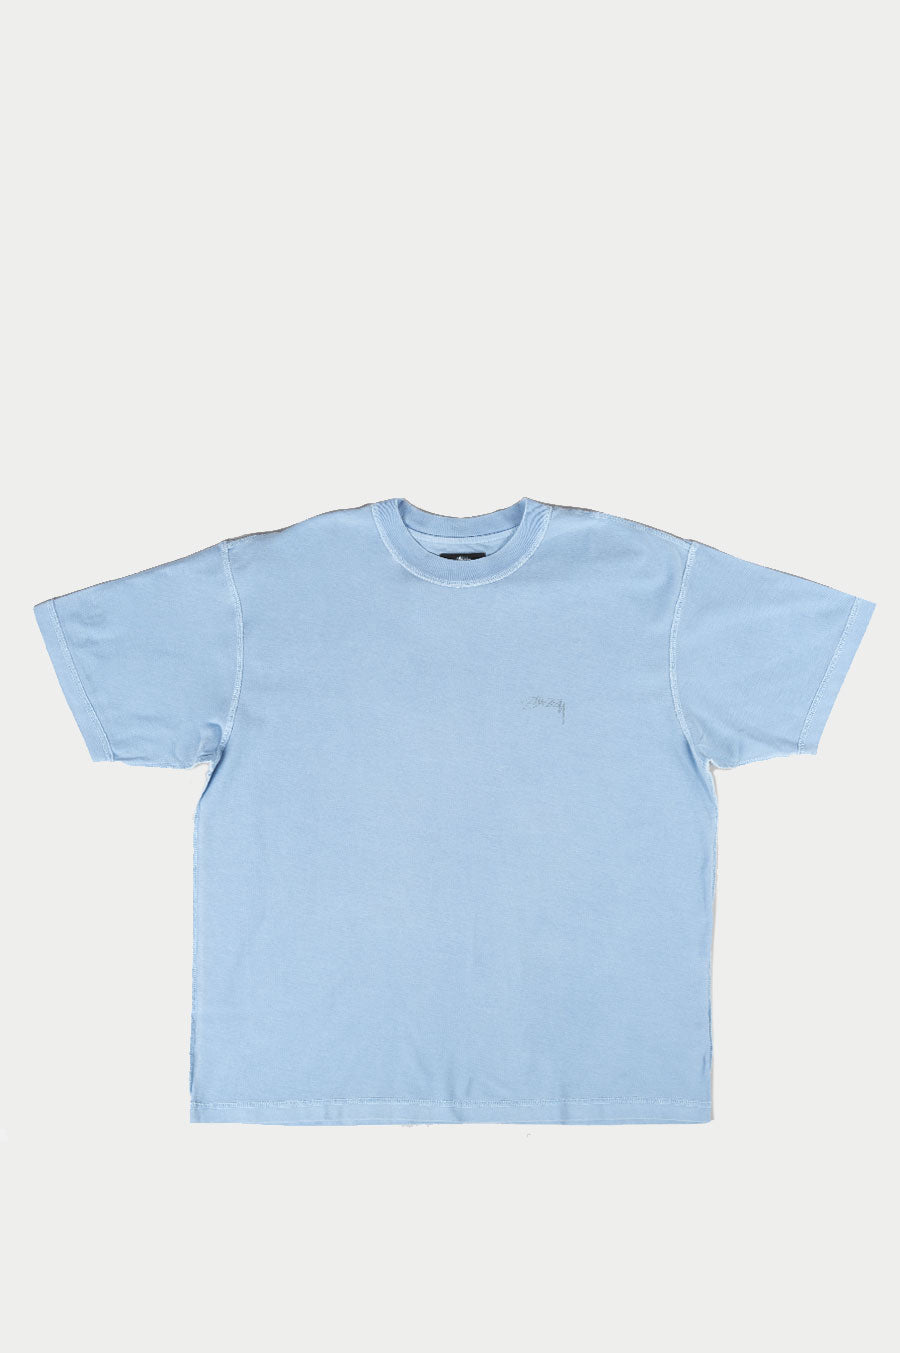 STUSSY PIGMENT DYED INSIDE OUT CREW BLUE